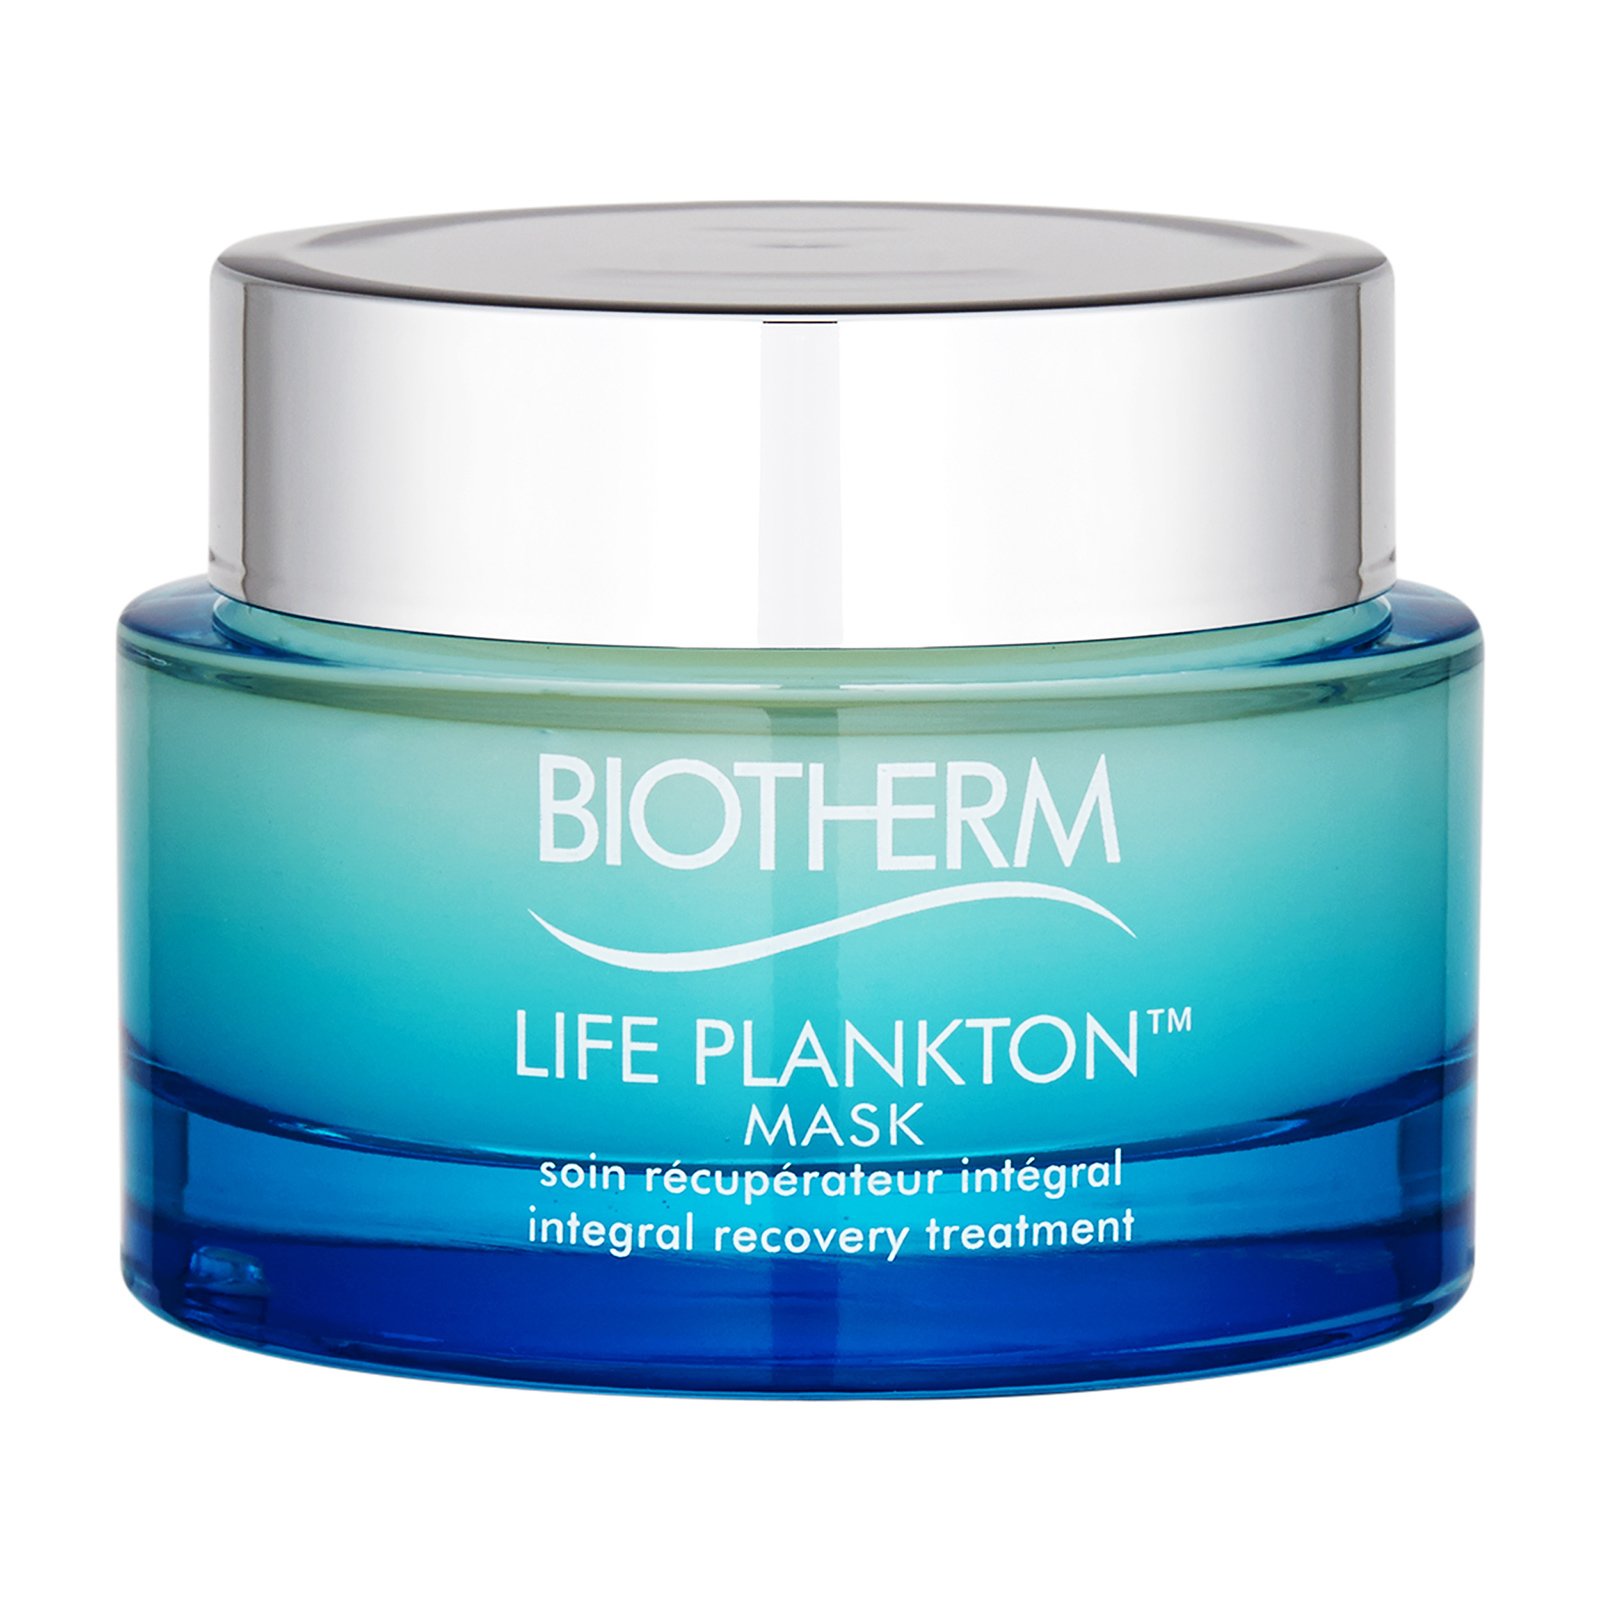 Life Plankton Mask Integral Recovery Treatment (All Skin Types Even Sensitive)